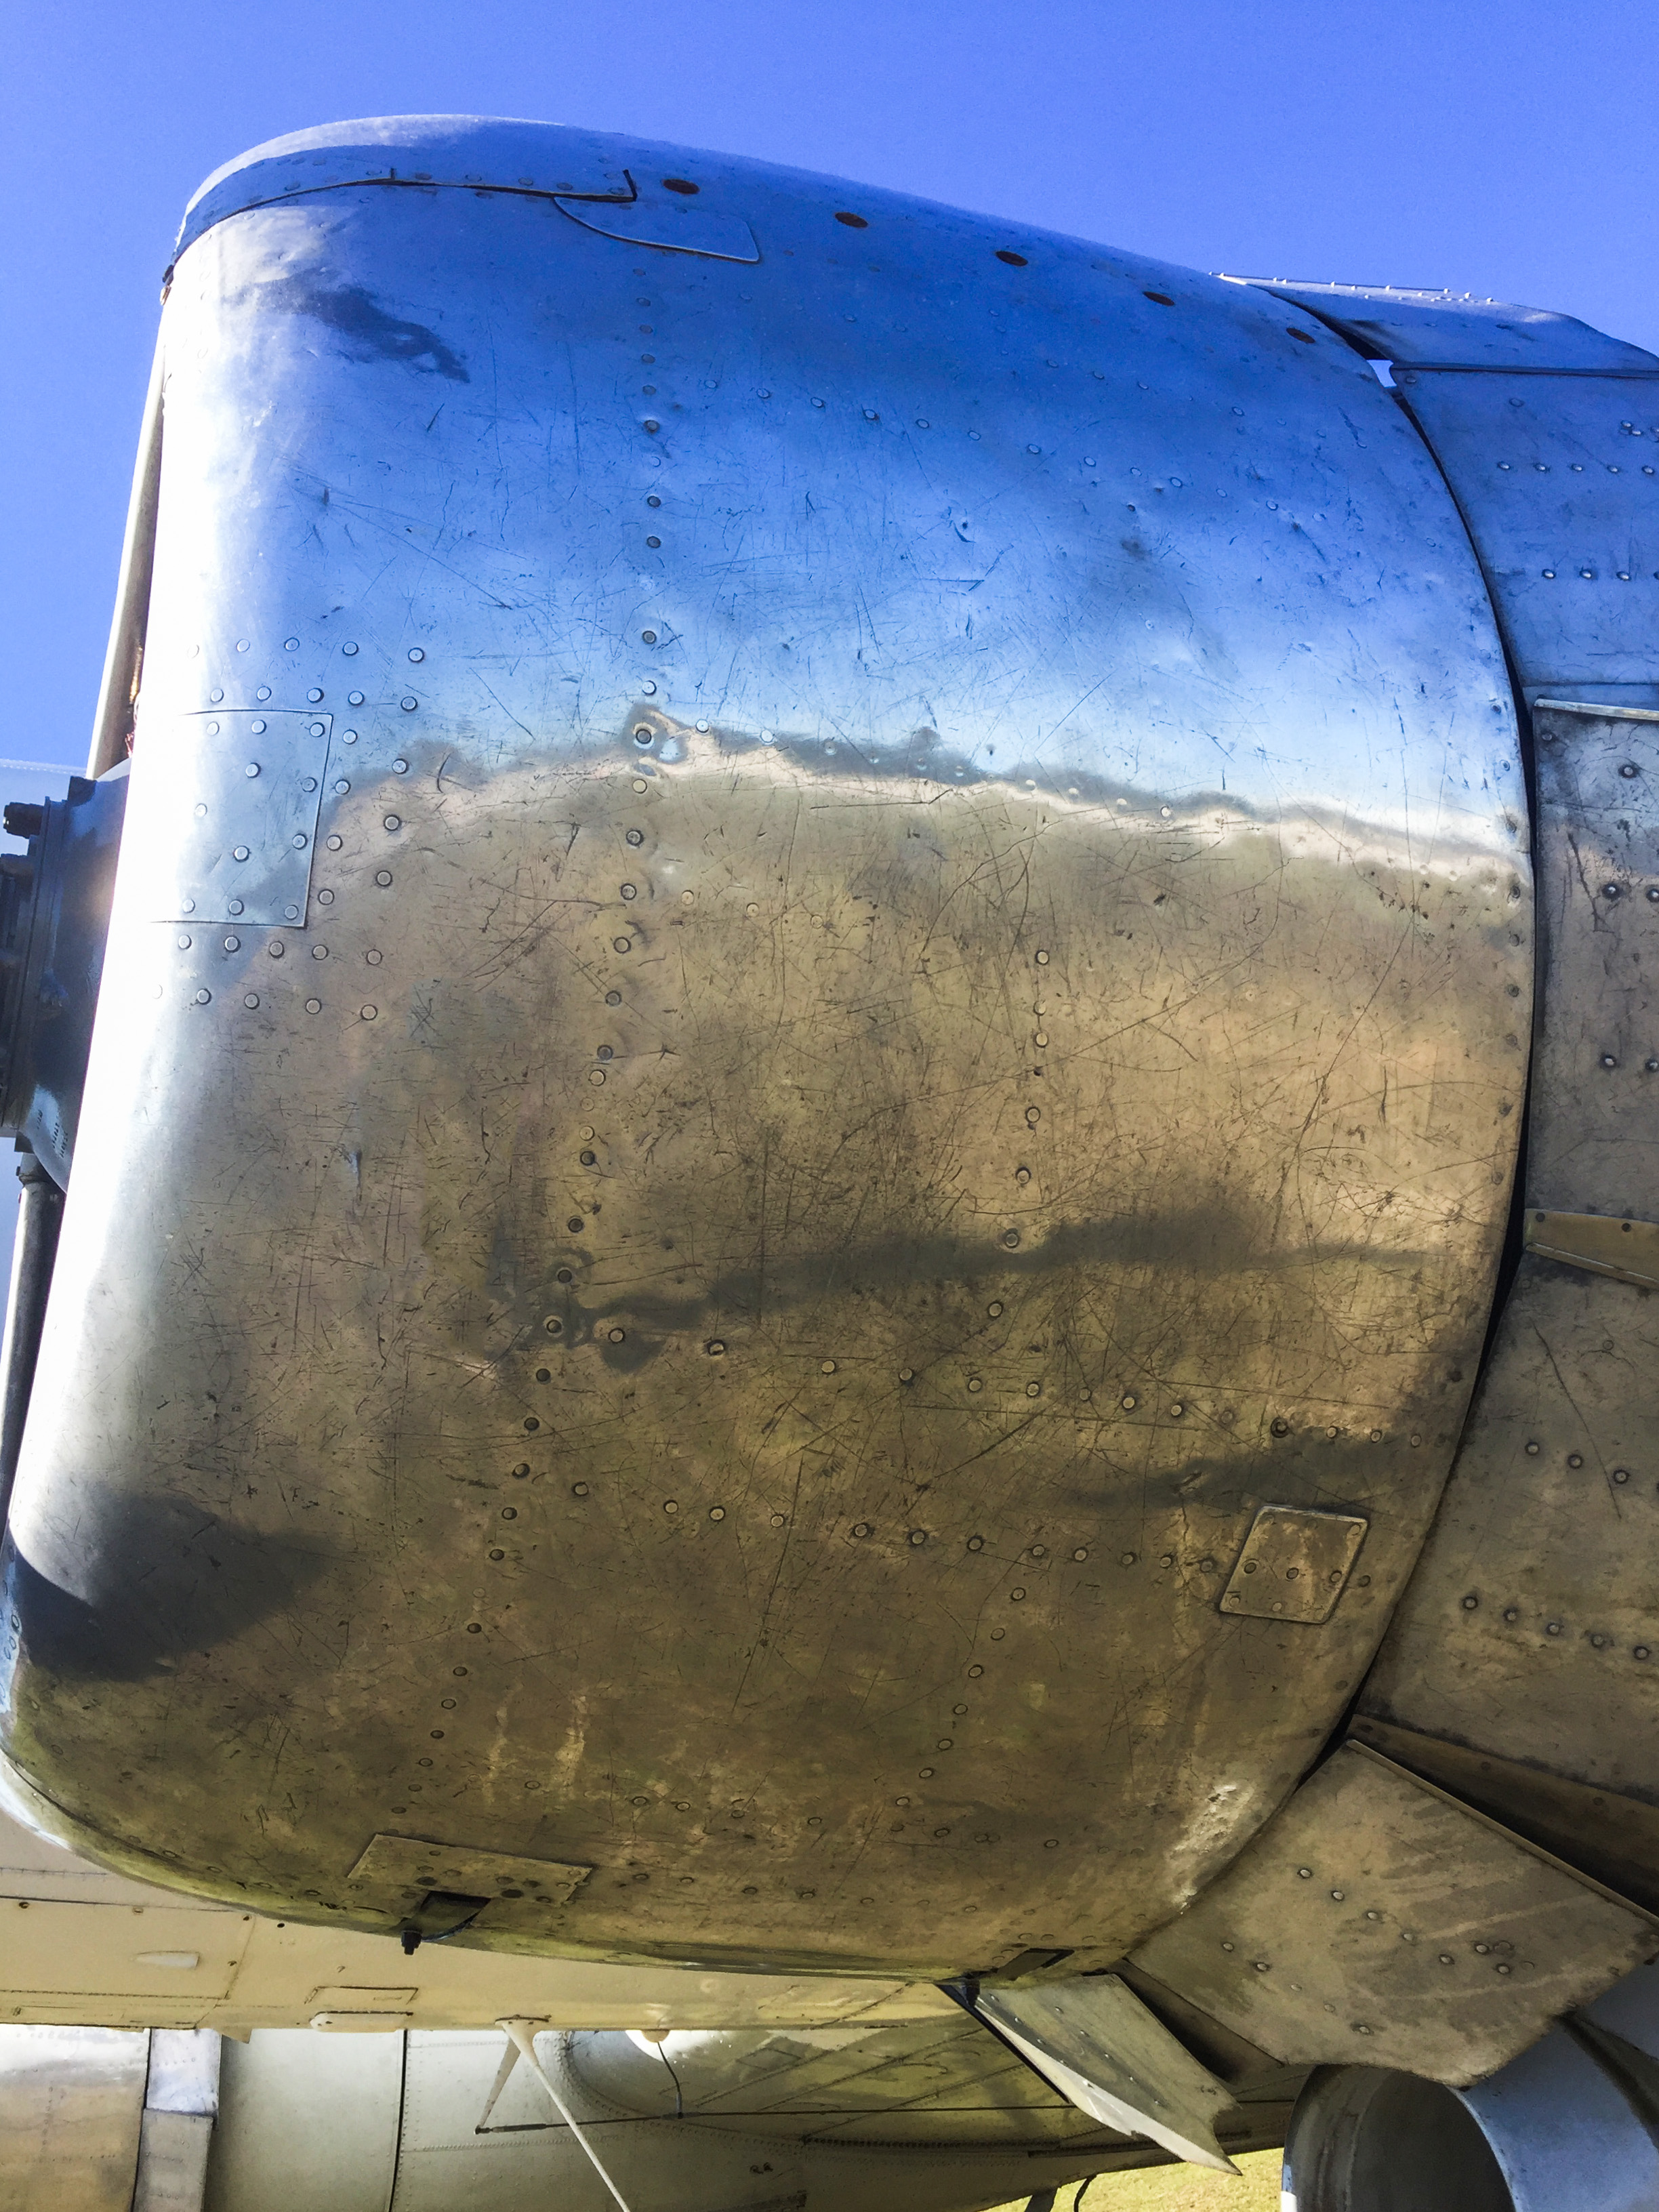 Dieter Canje took the texture and details in his photograph of a worn and well loved DC-3 engine cowling and used it to create an authentic vintage aircraft skin look to the SkyCart trolleys. The results were highly effective!